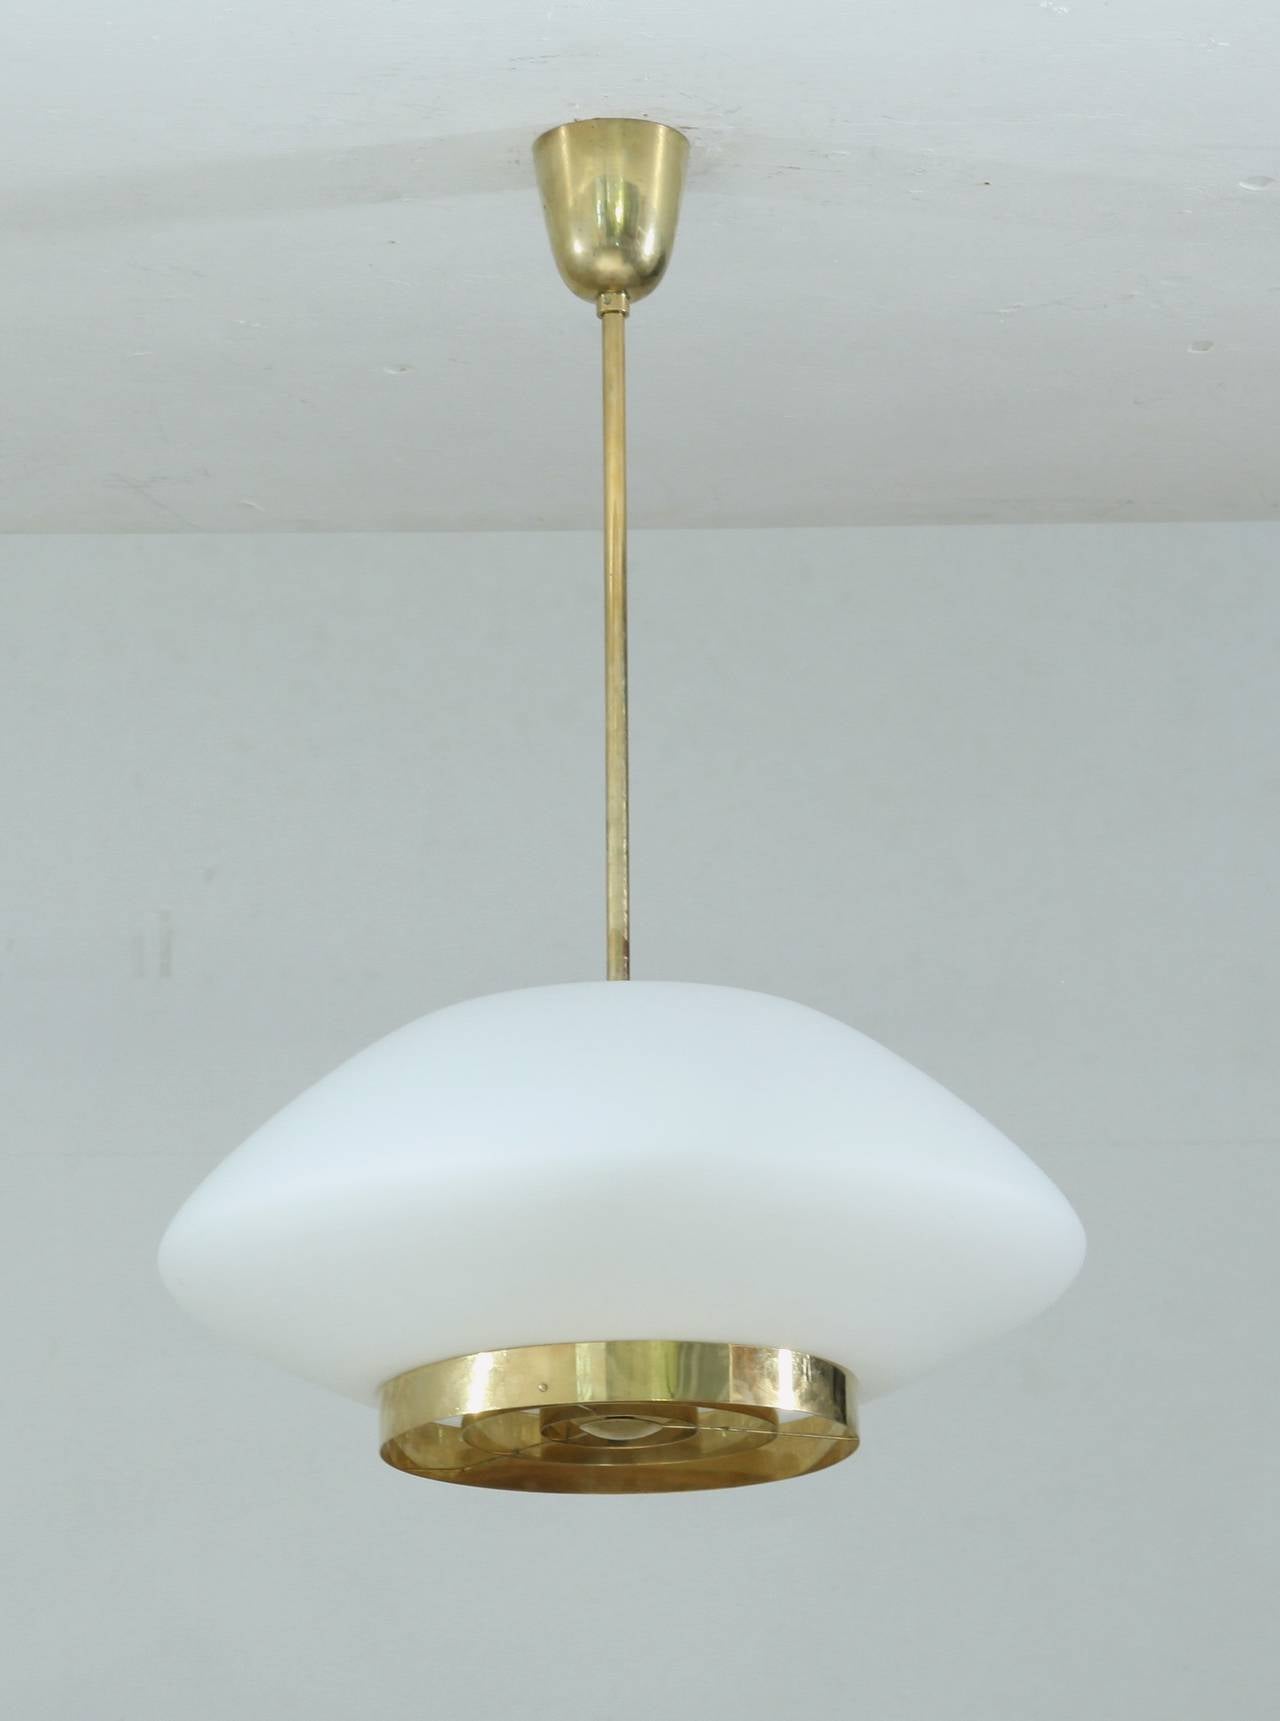 A perfect condition model 61-338 pendant lamp by Lisa Johansson-Pape for Stockmann Orno, made of opaline glass and a brass grid.